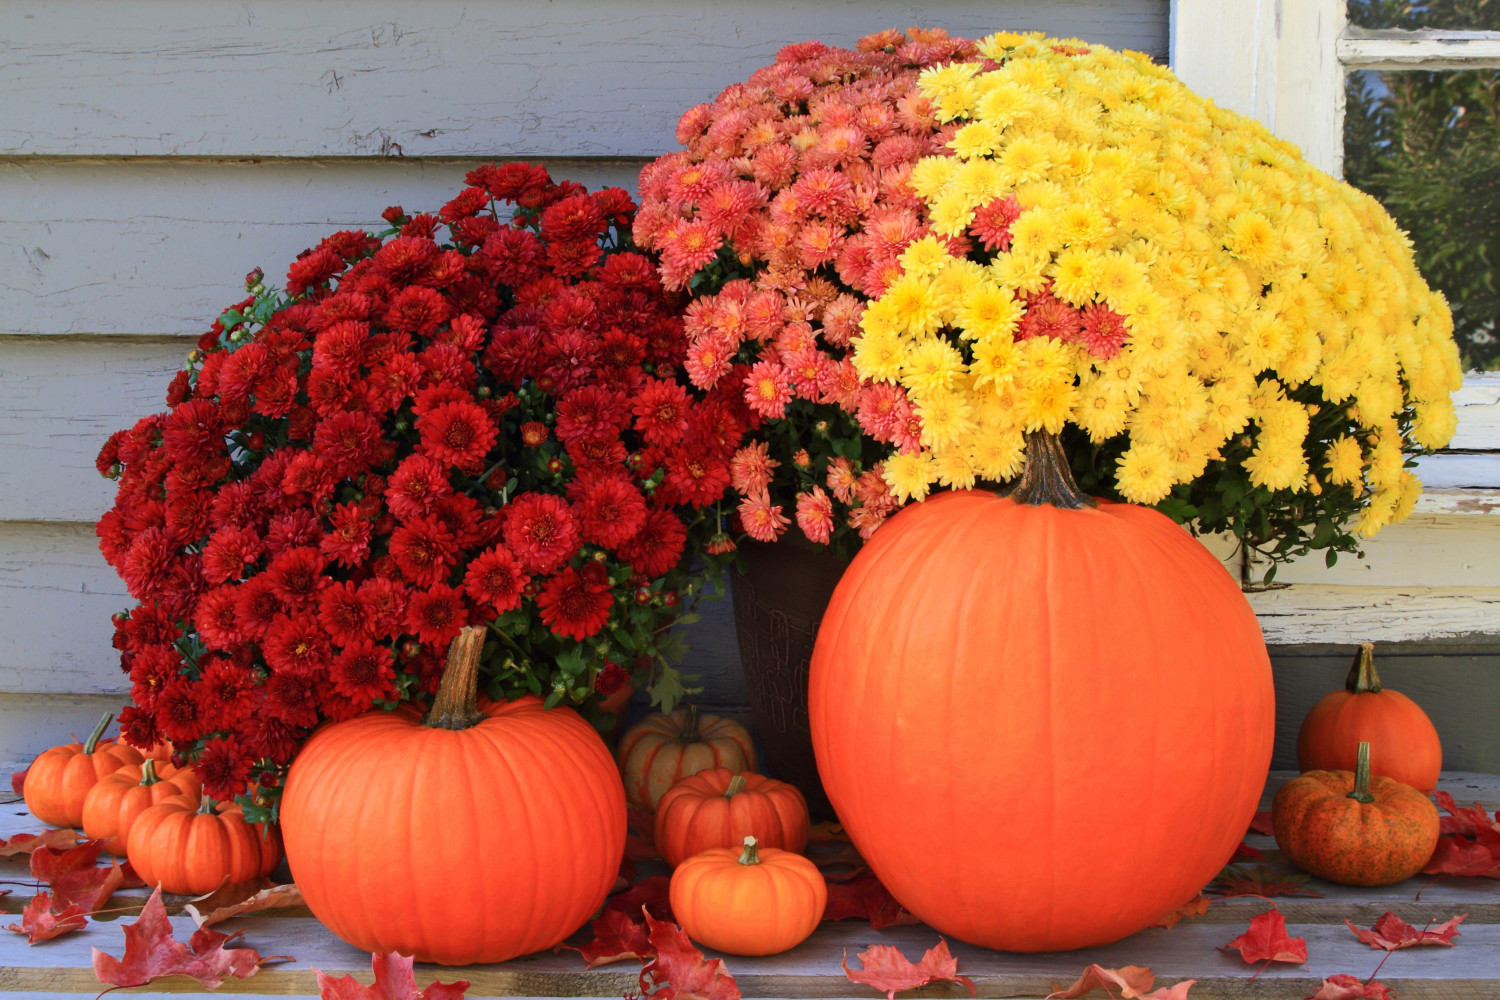 Fall mums with pumpkins on porch